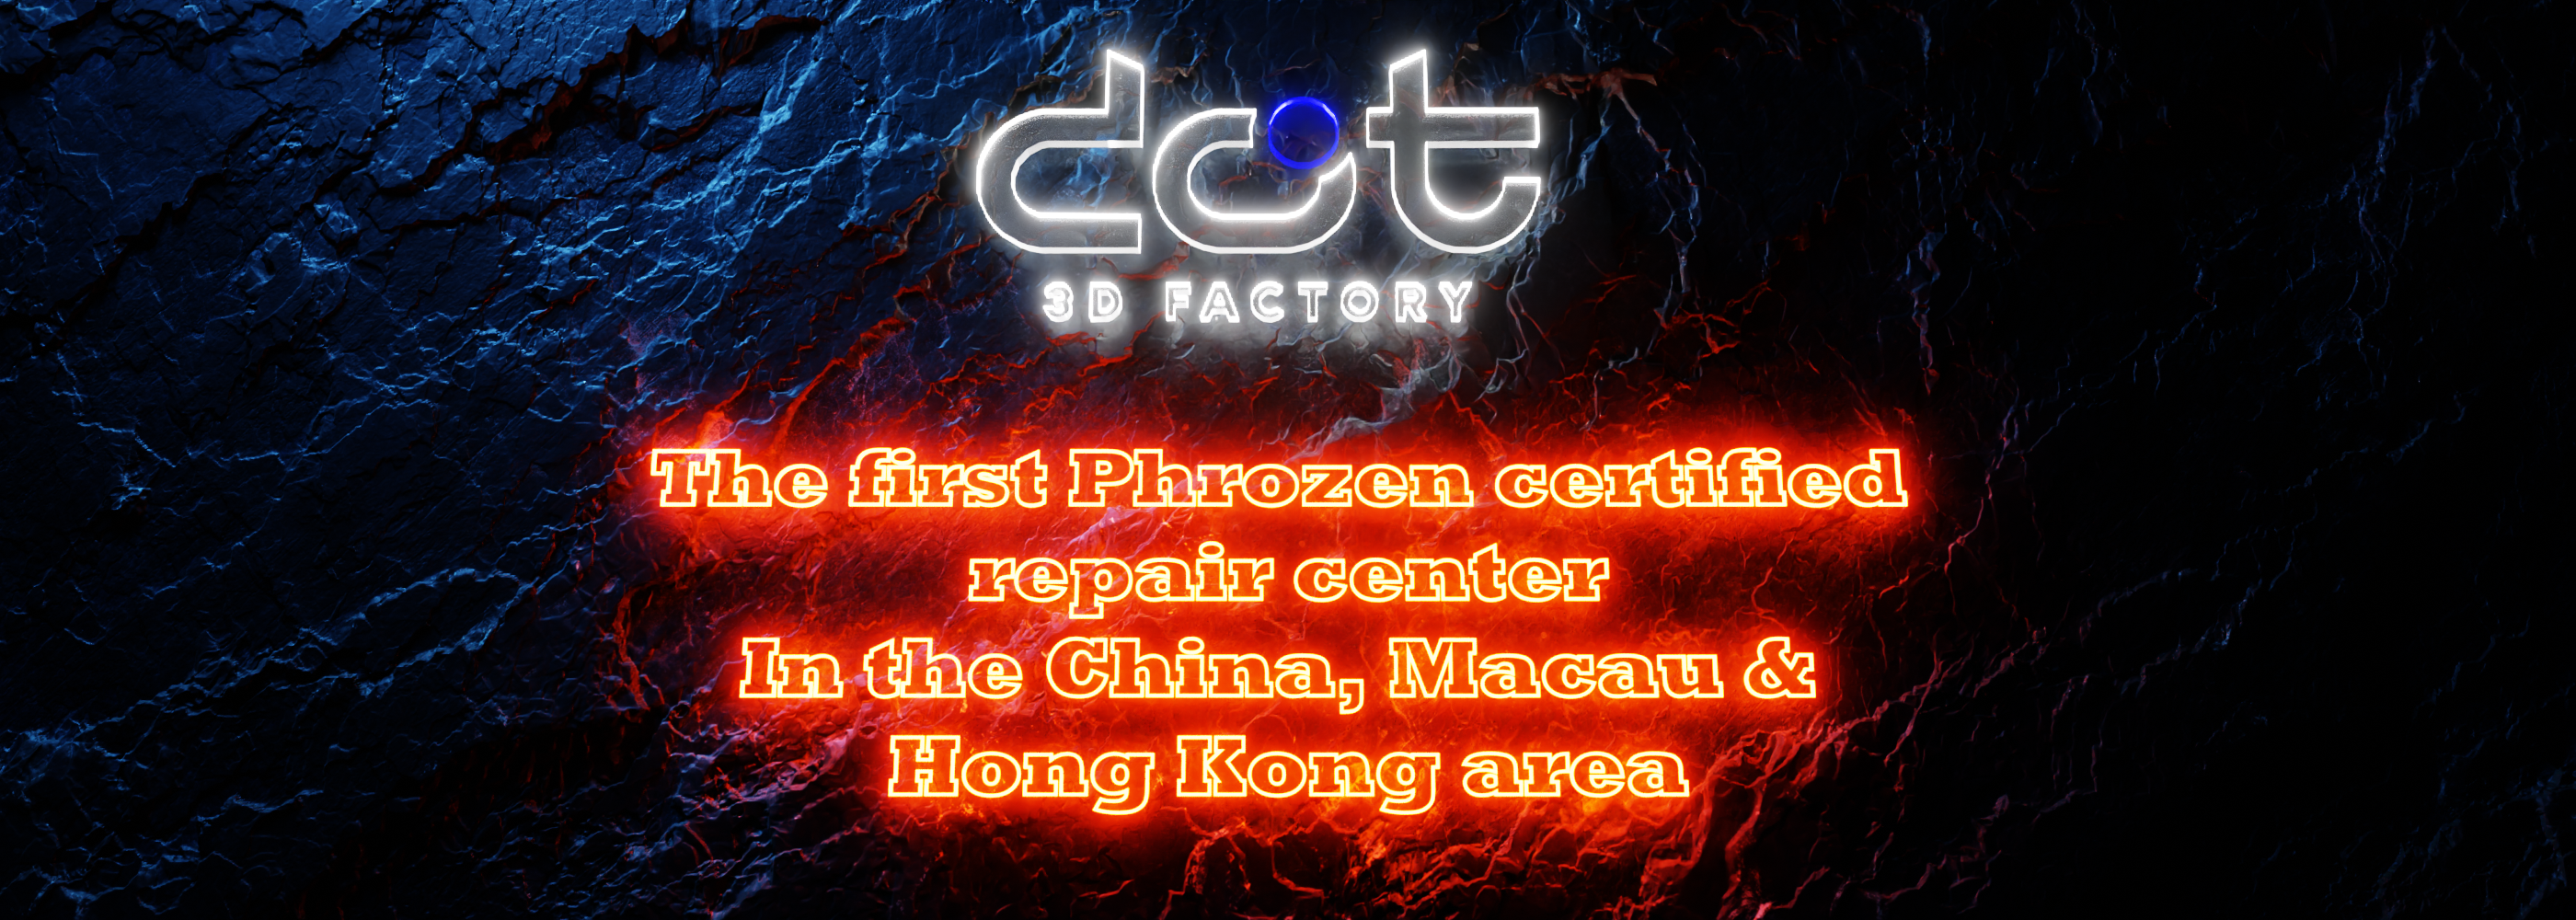 We Become the First Phrozen Certified Repair Center